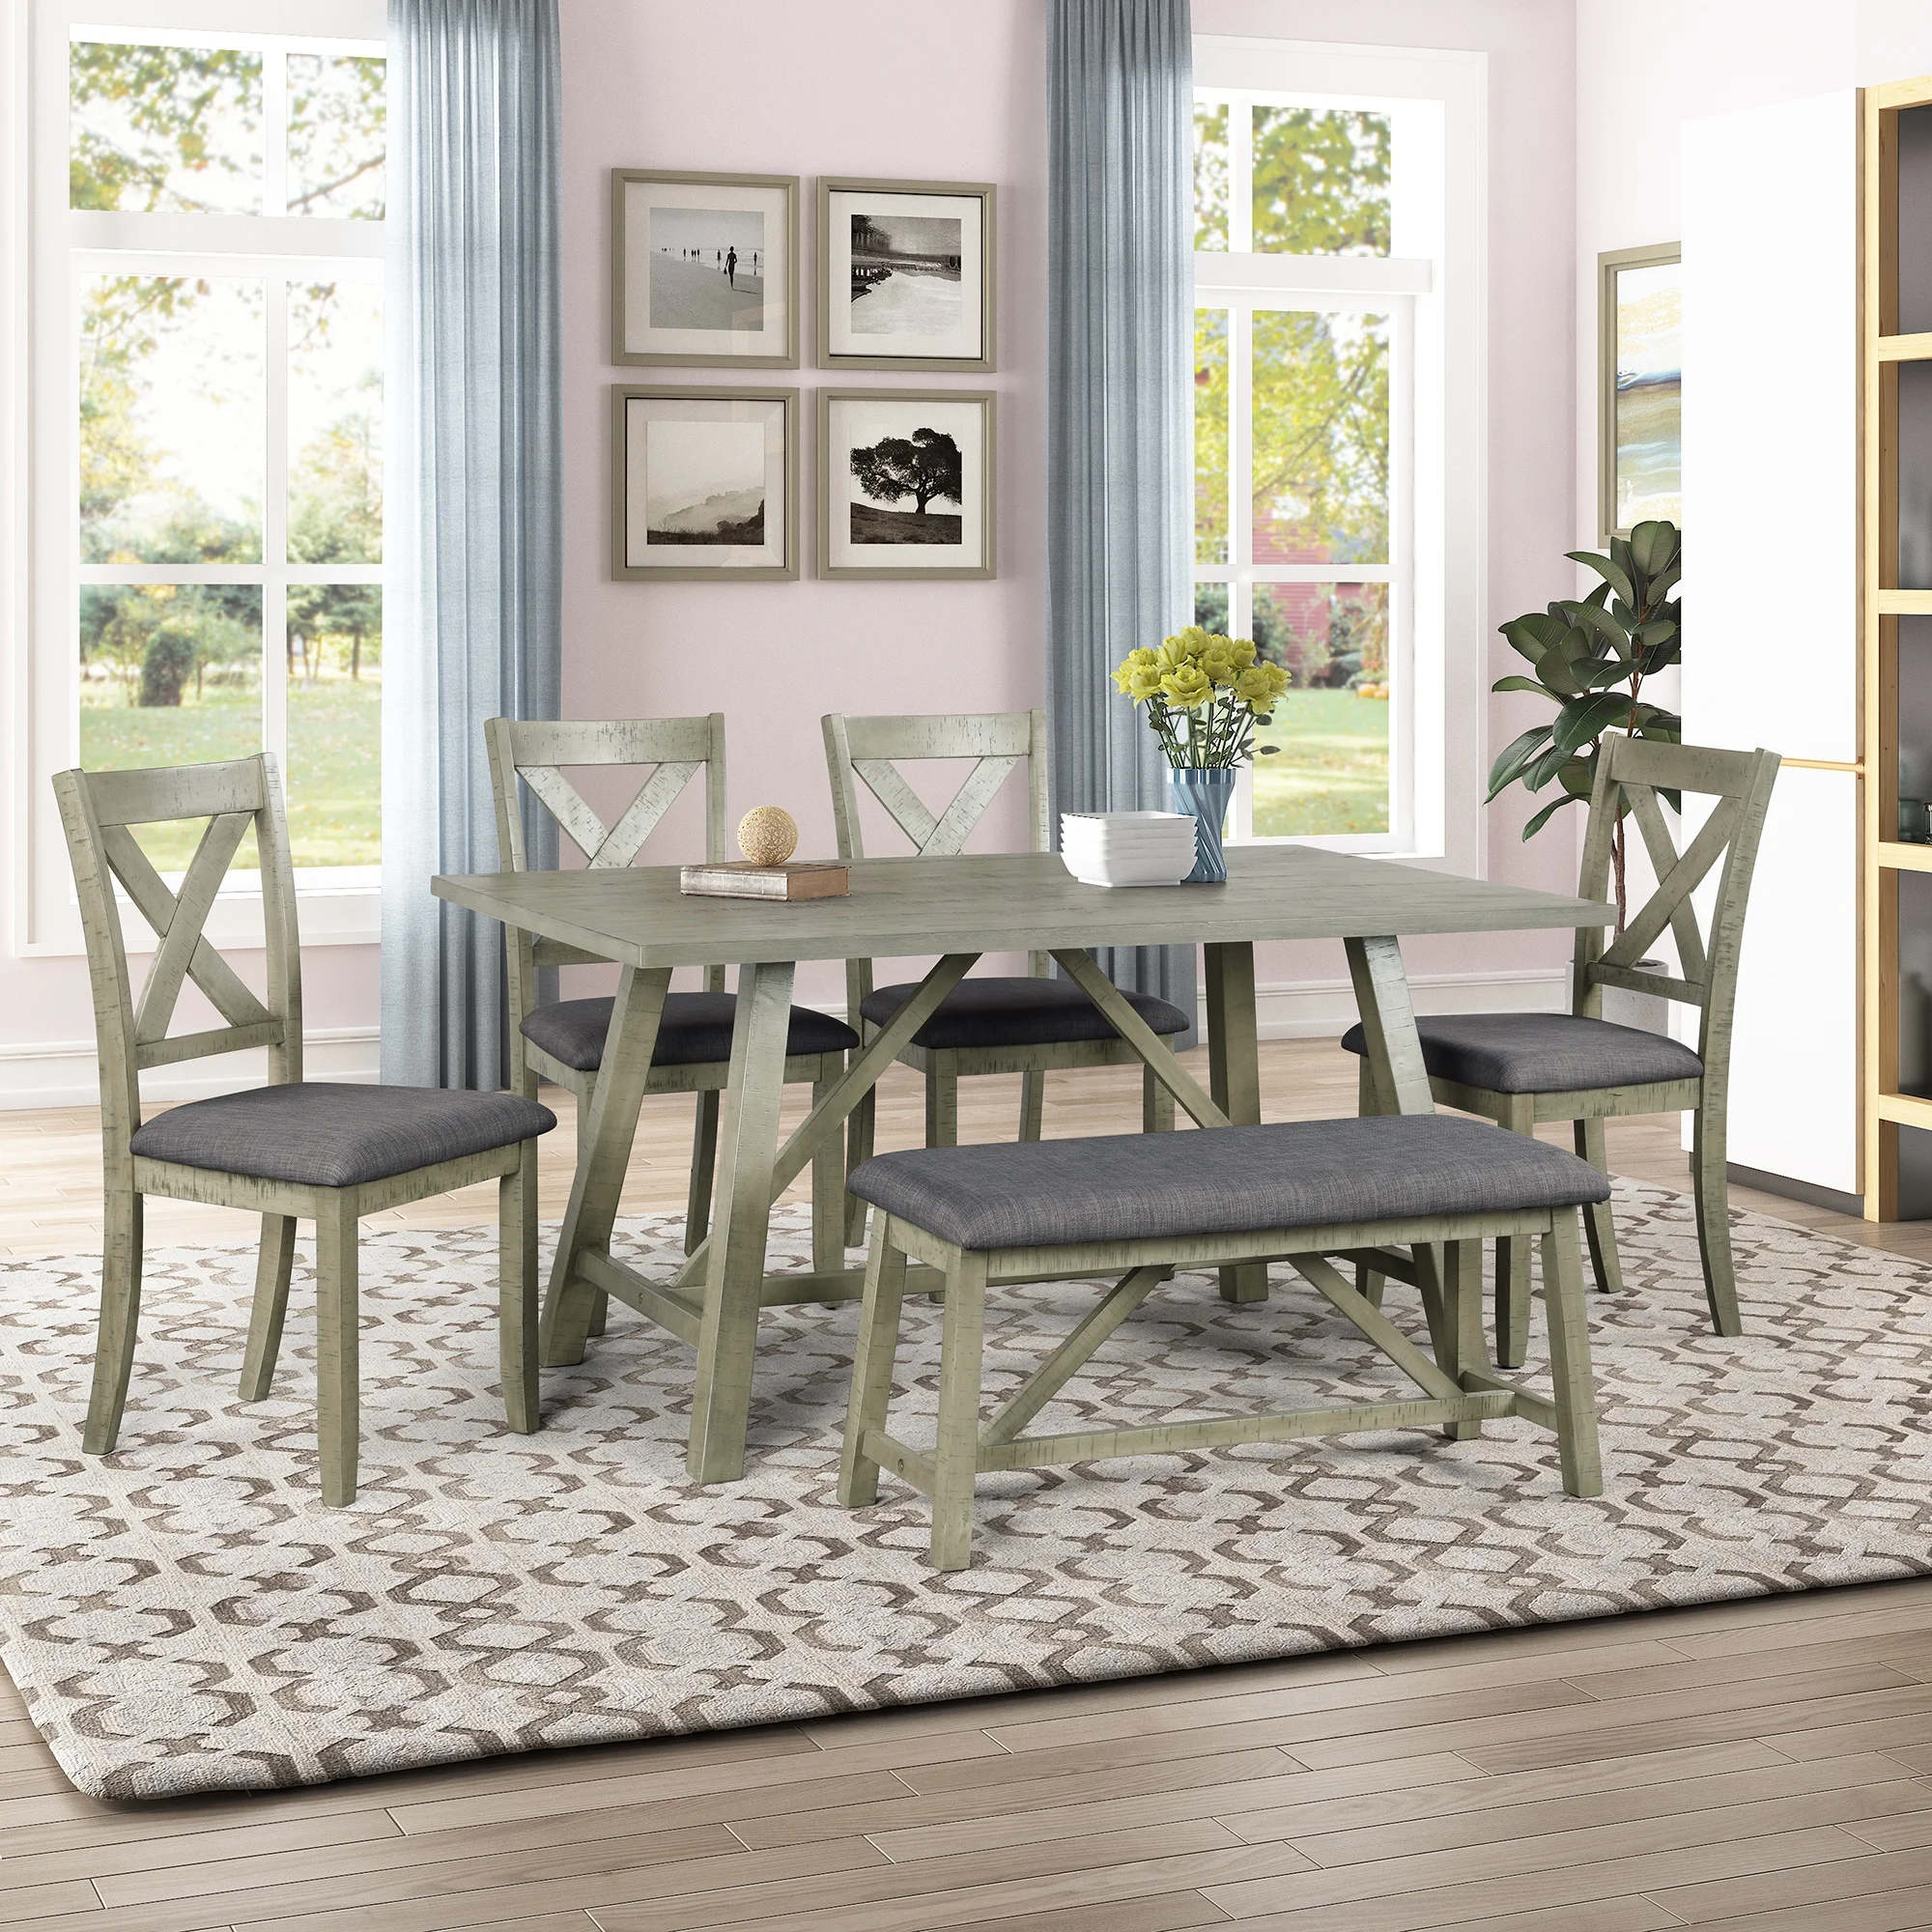 Wood Dining Table And Chair Kitchen Table Set With Table